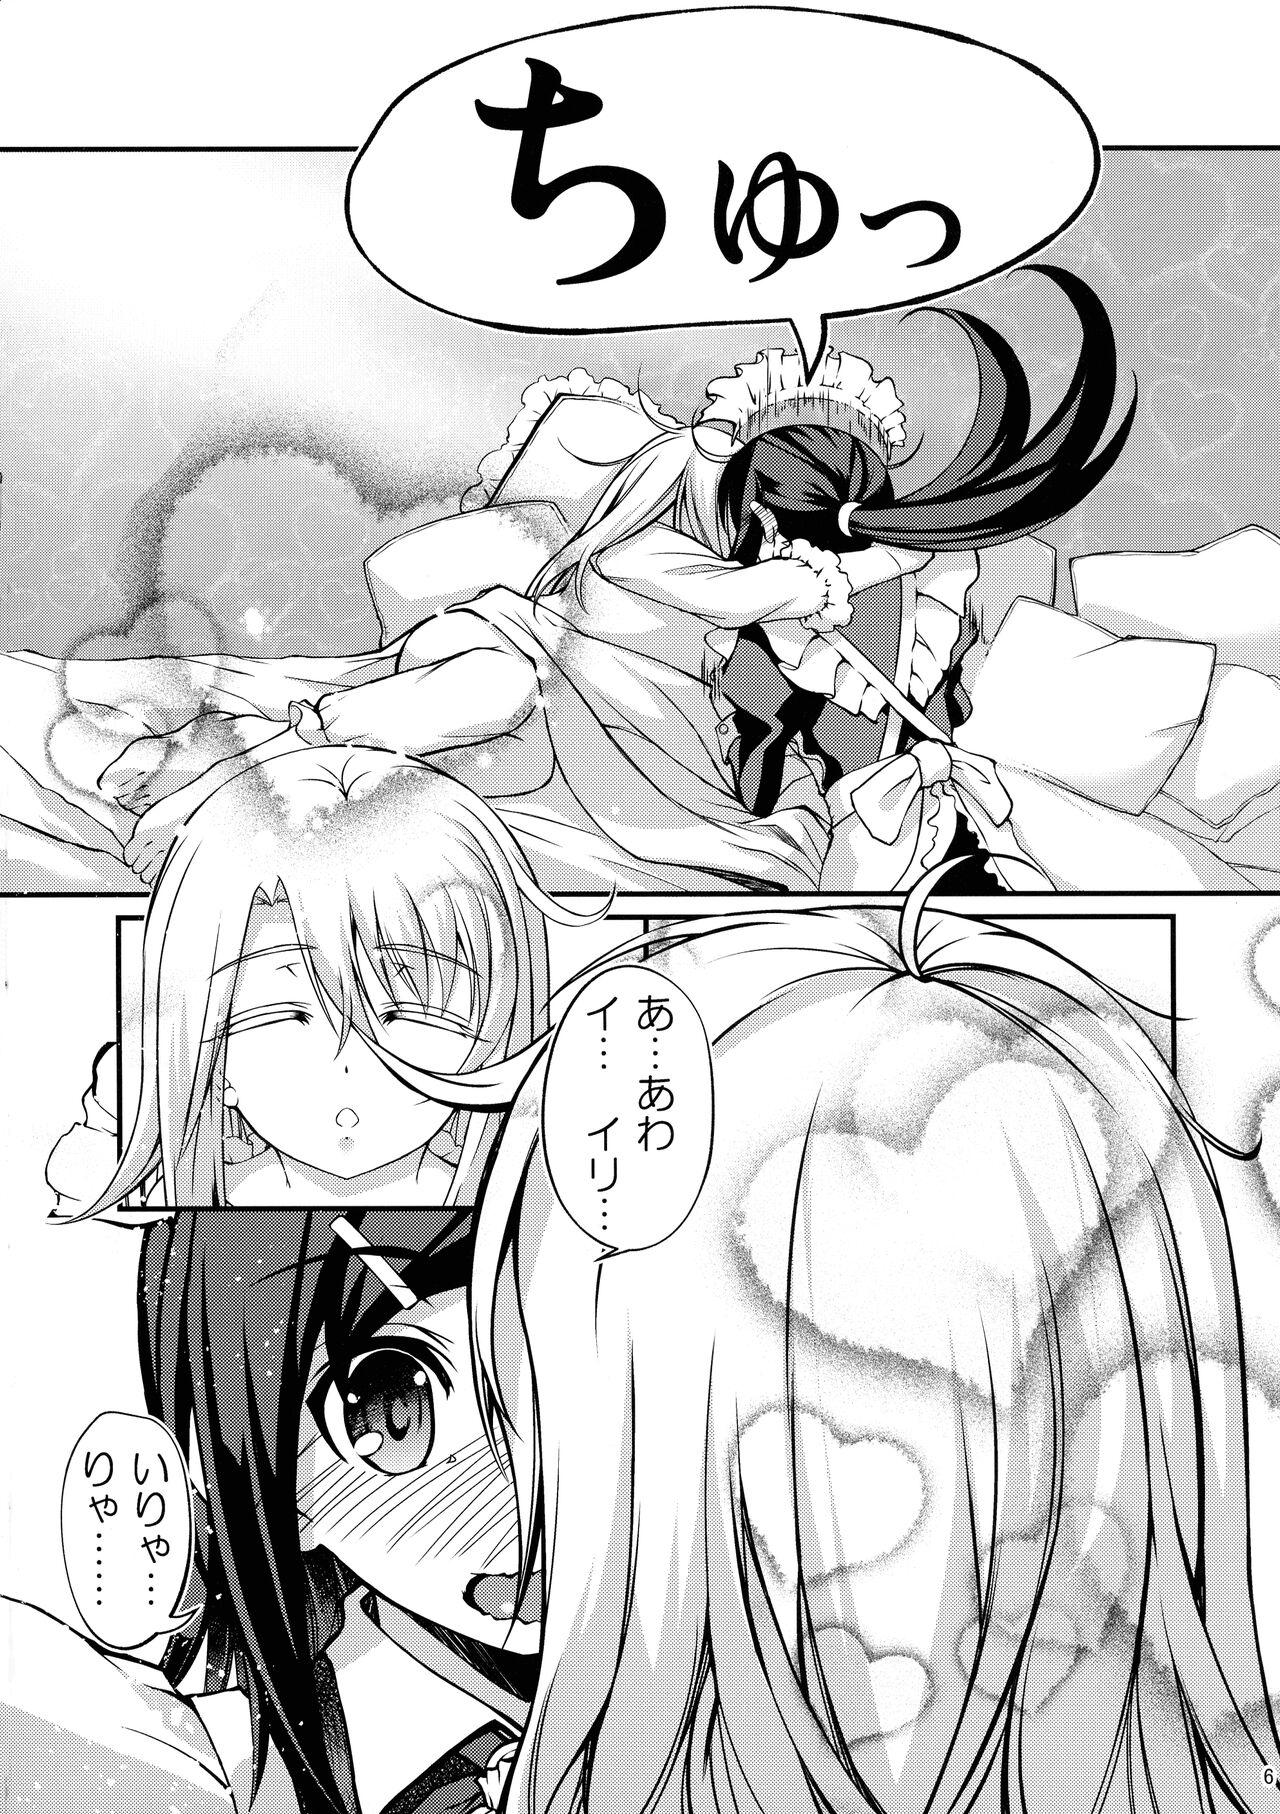 Girl On Girl SHH:01 - Fate kaleid liner prisma illya Old Young - Page 5